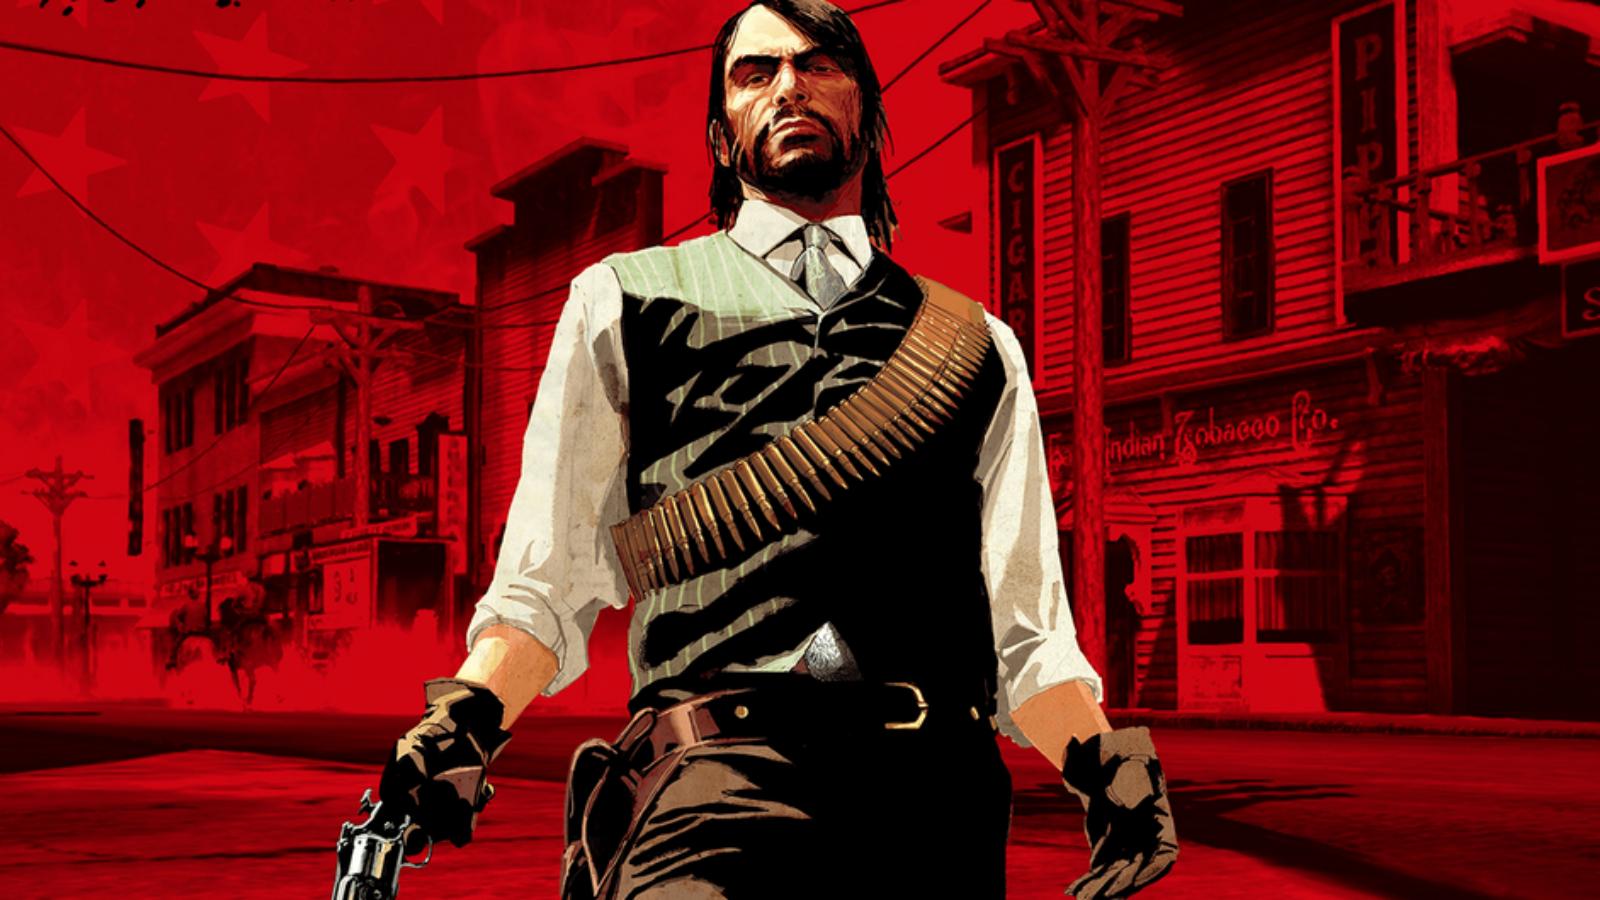 Dexerto Gaming on X: Latest rumors claim Red Dead Redemption 2's